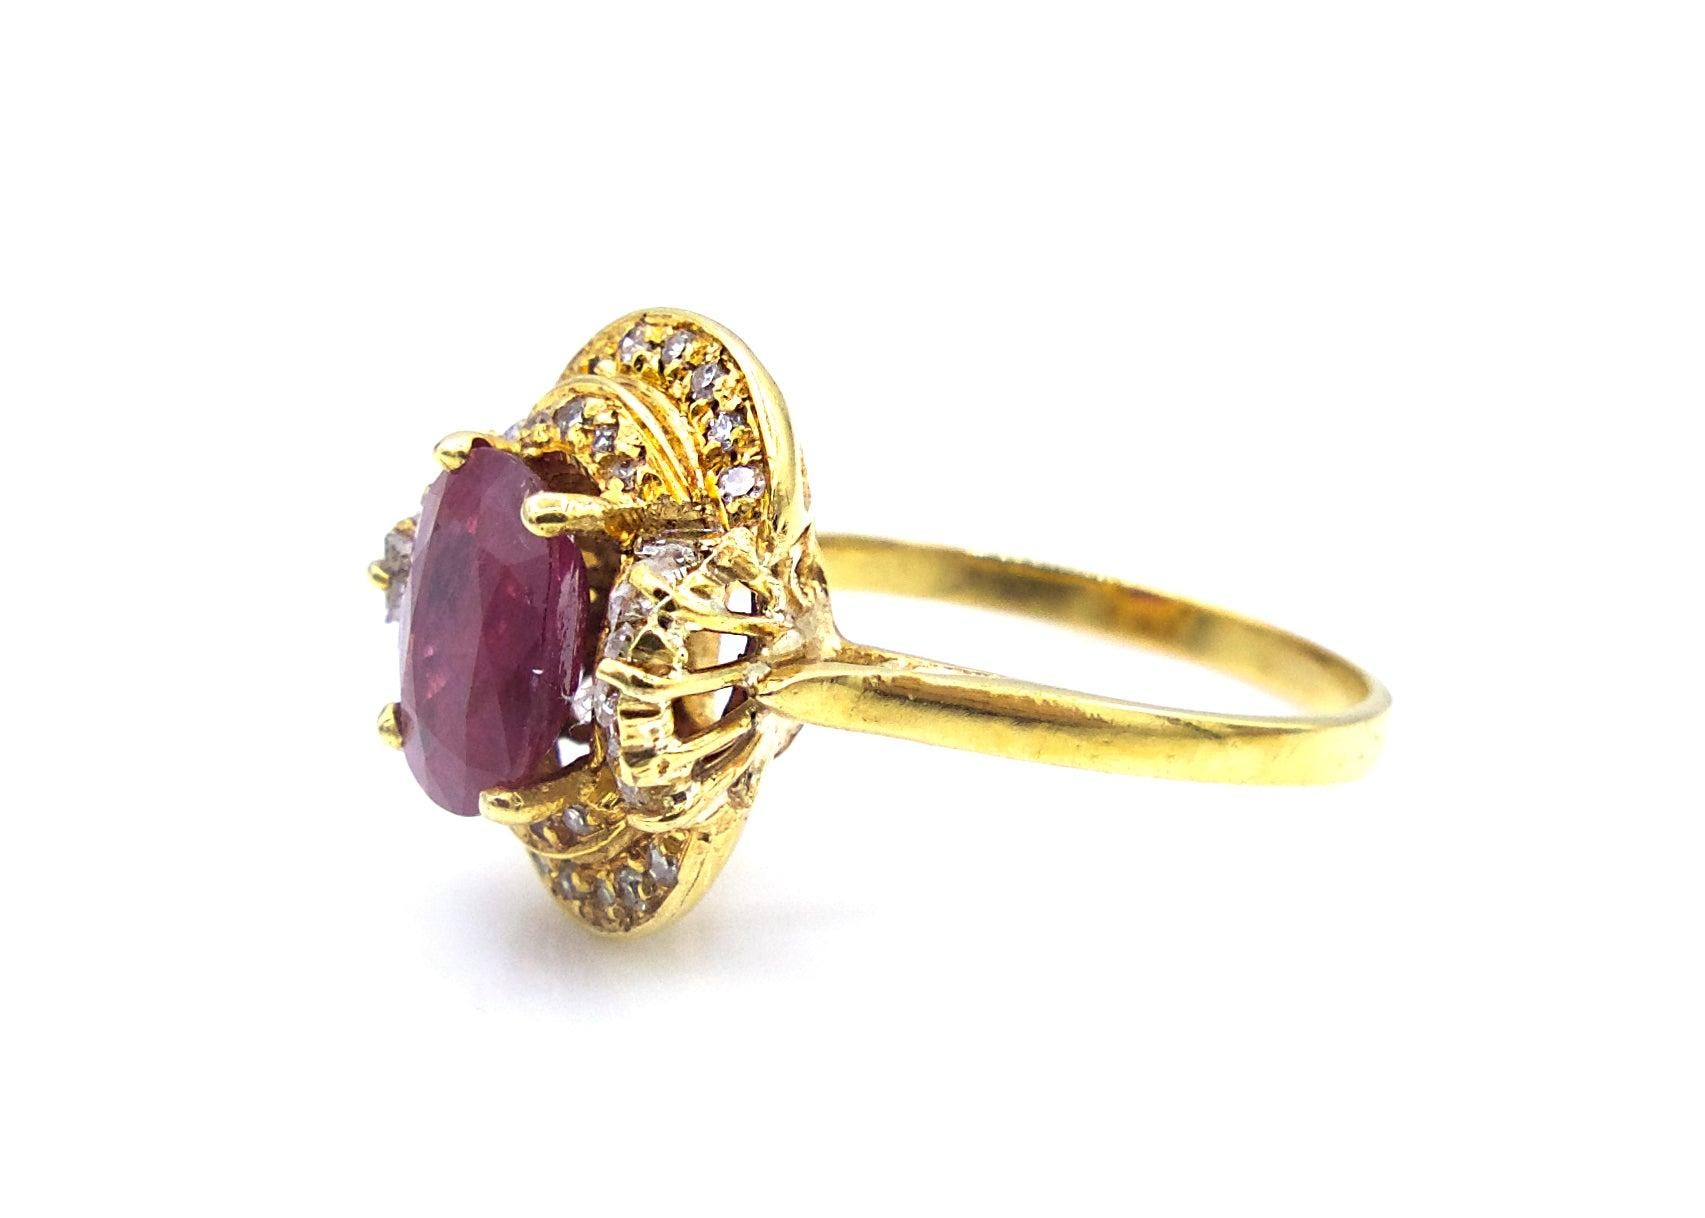 This faceted ruby ring is set in 18K yellow gold with the center stone surrounded by 12 baguette diamonds and 22 round cut diamonds. 

Size 6.5

4.3 g